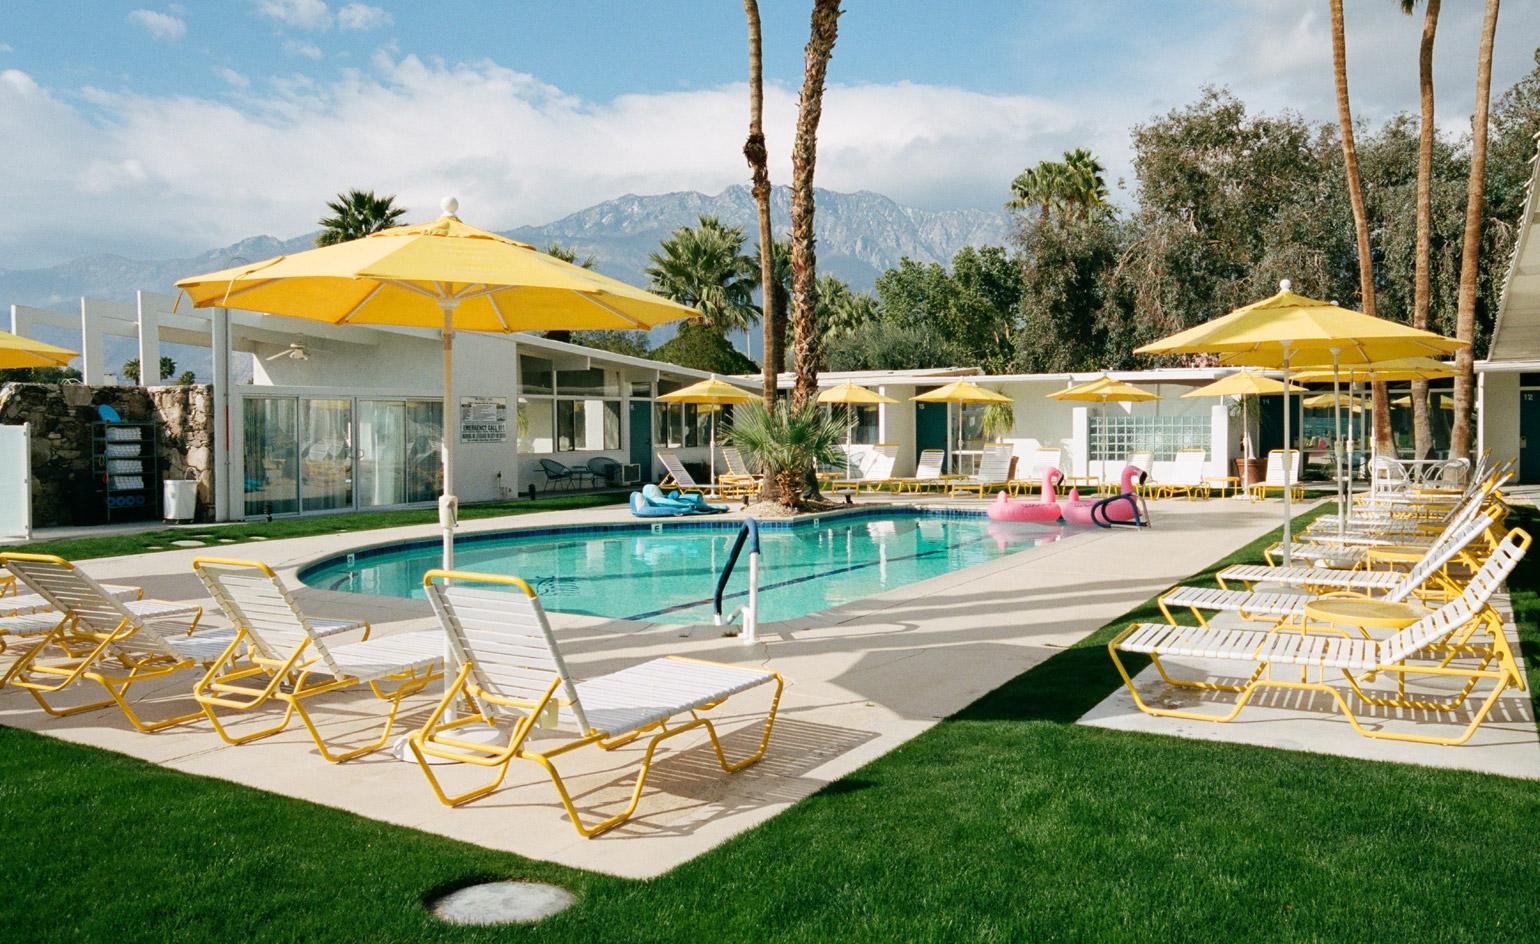 The 7 best Palm Springs hotels making waves. Wallpaper*